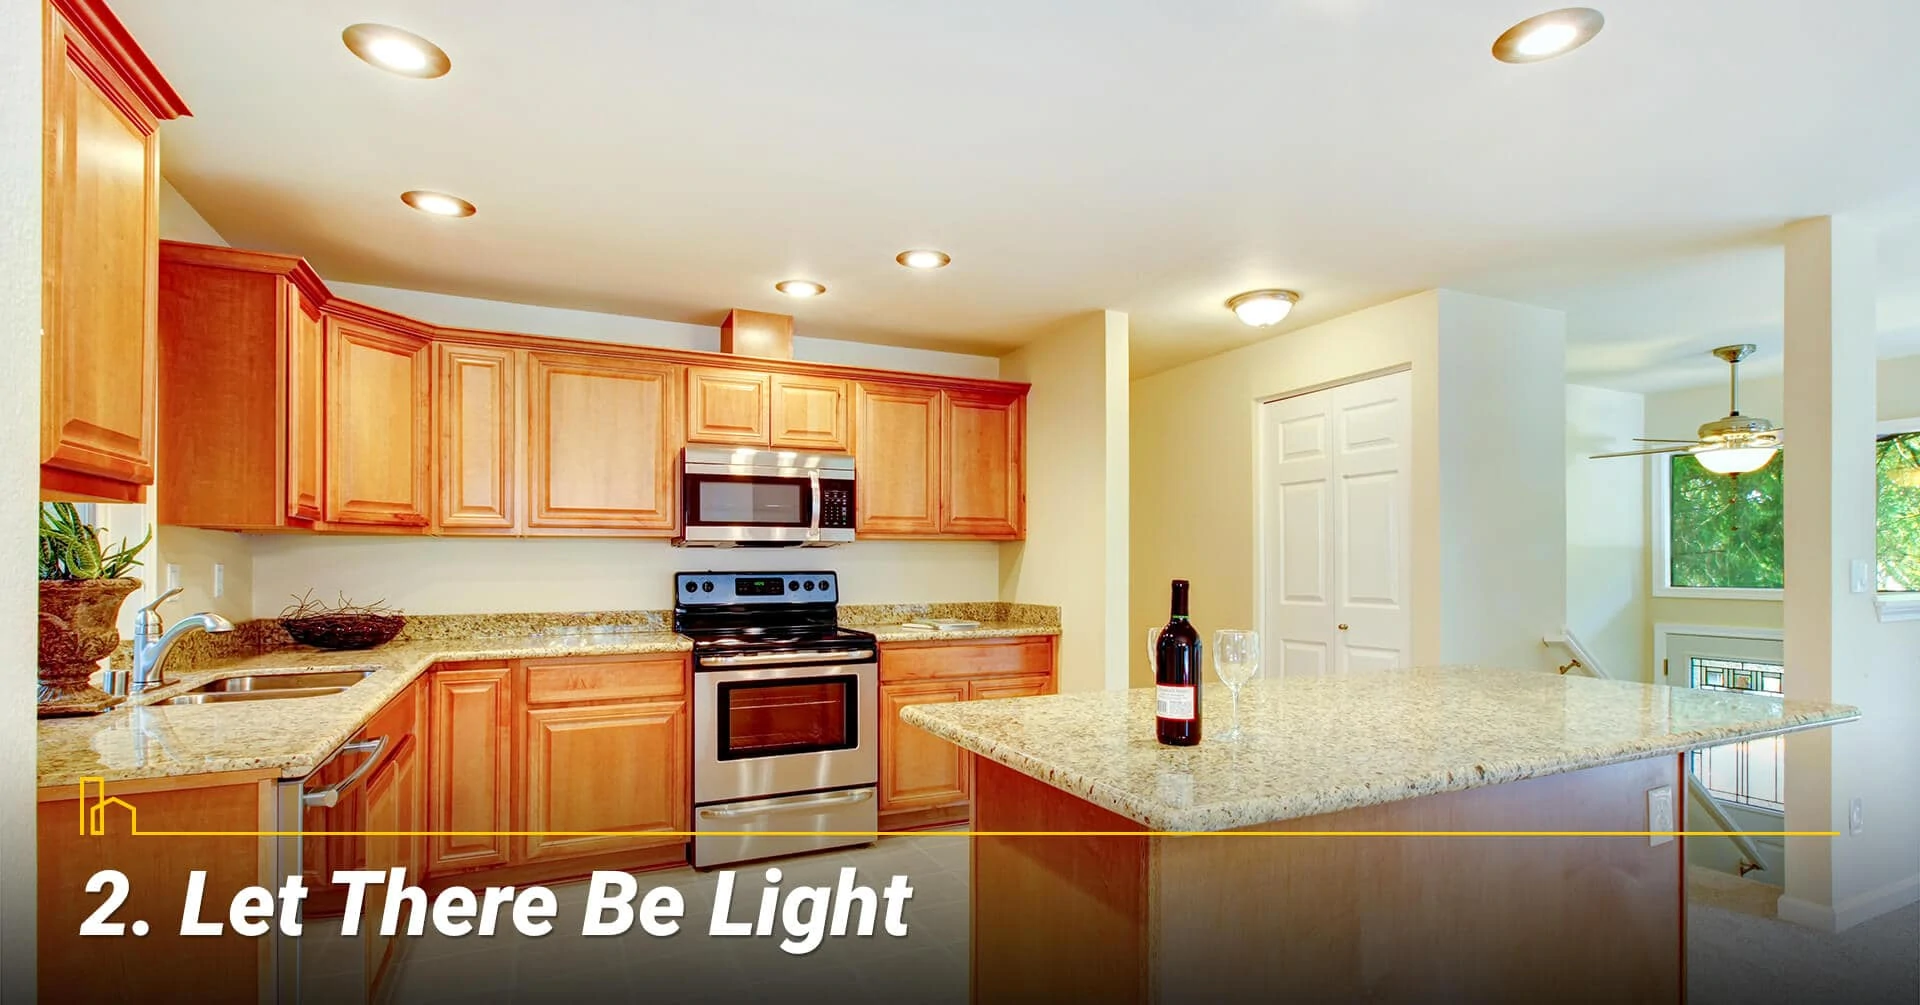 Let There Be Light, lighten up your kitchen